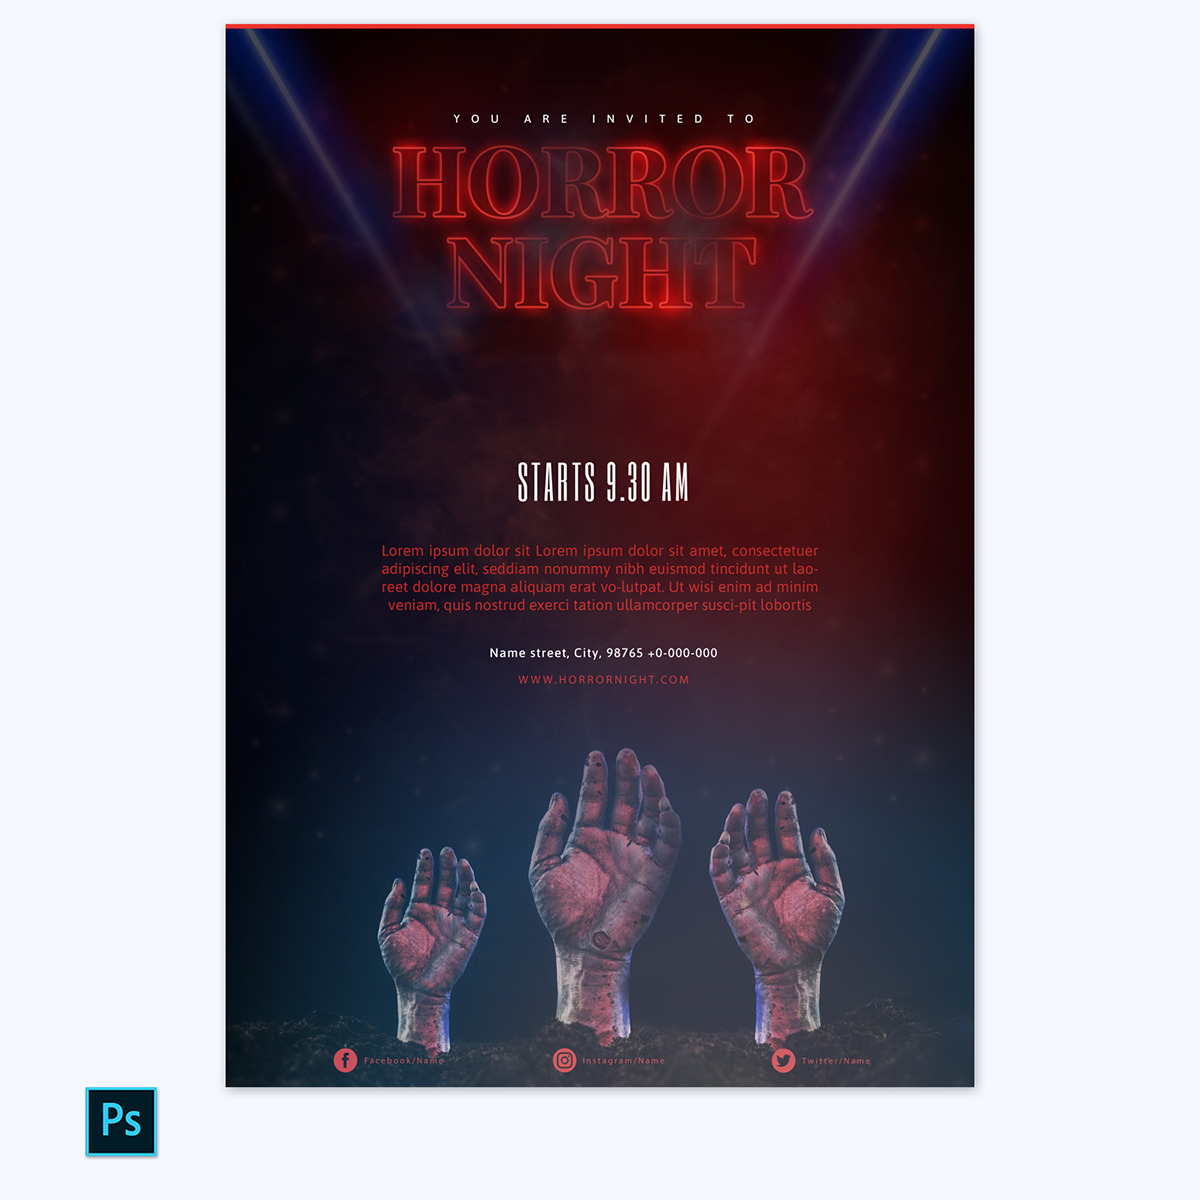 Free Movie Poster Template 03 in Photoshop